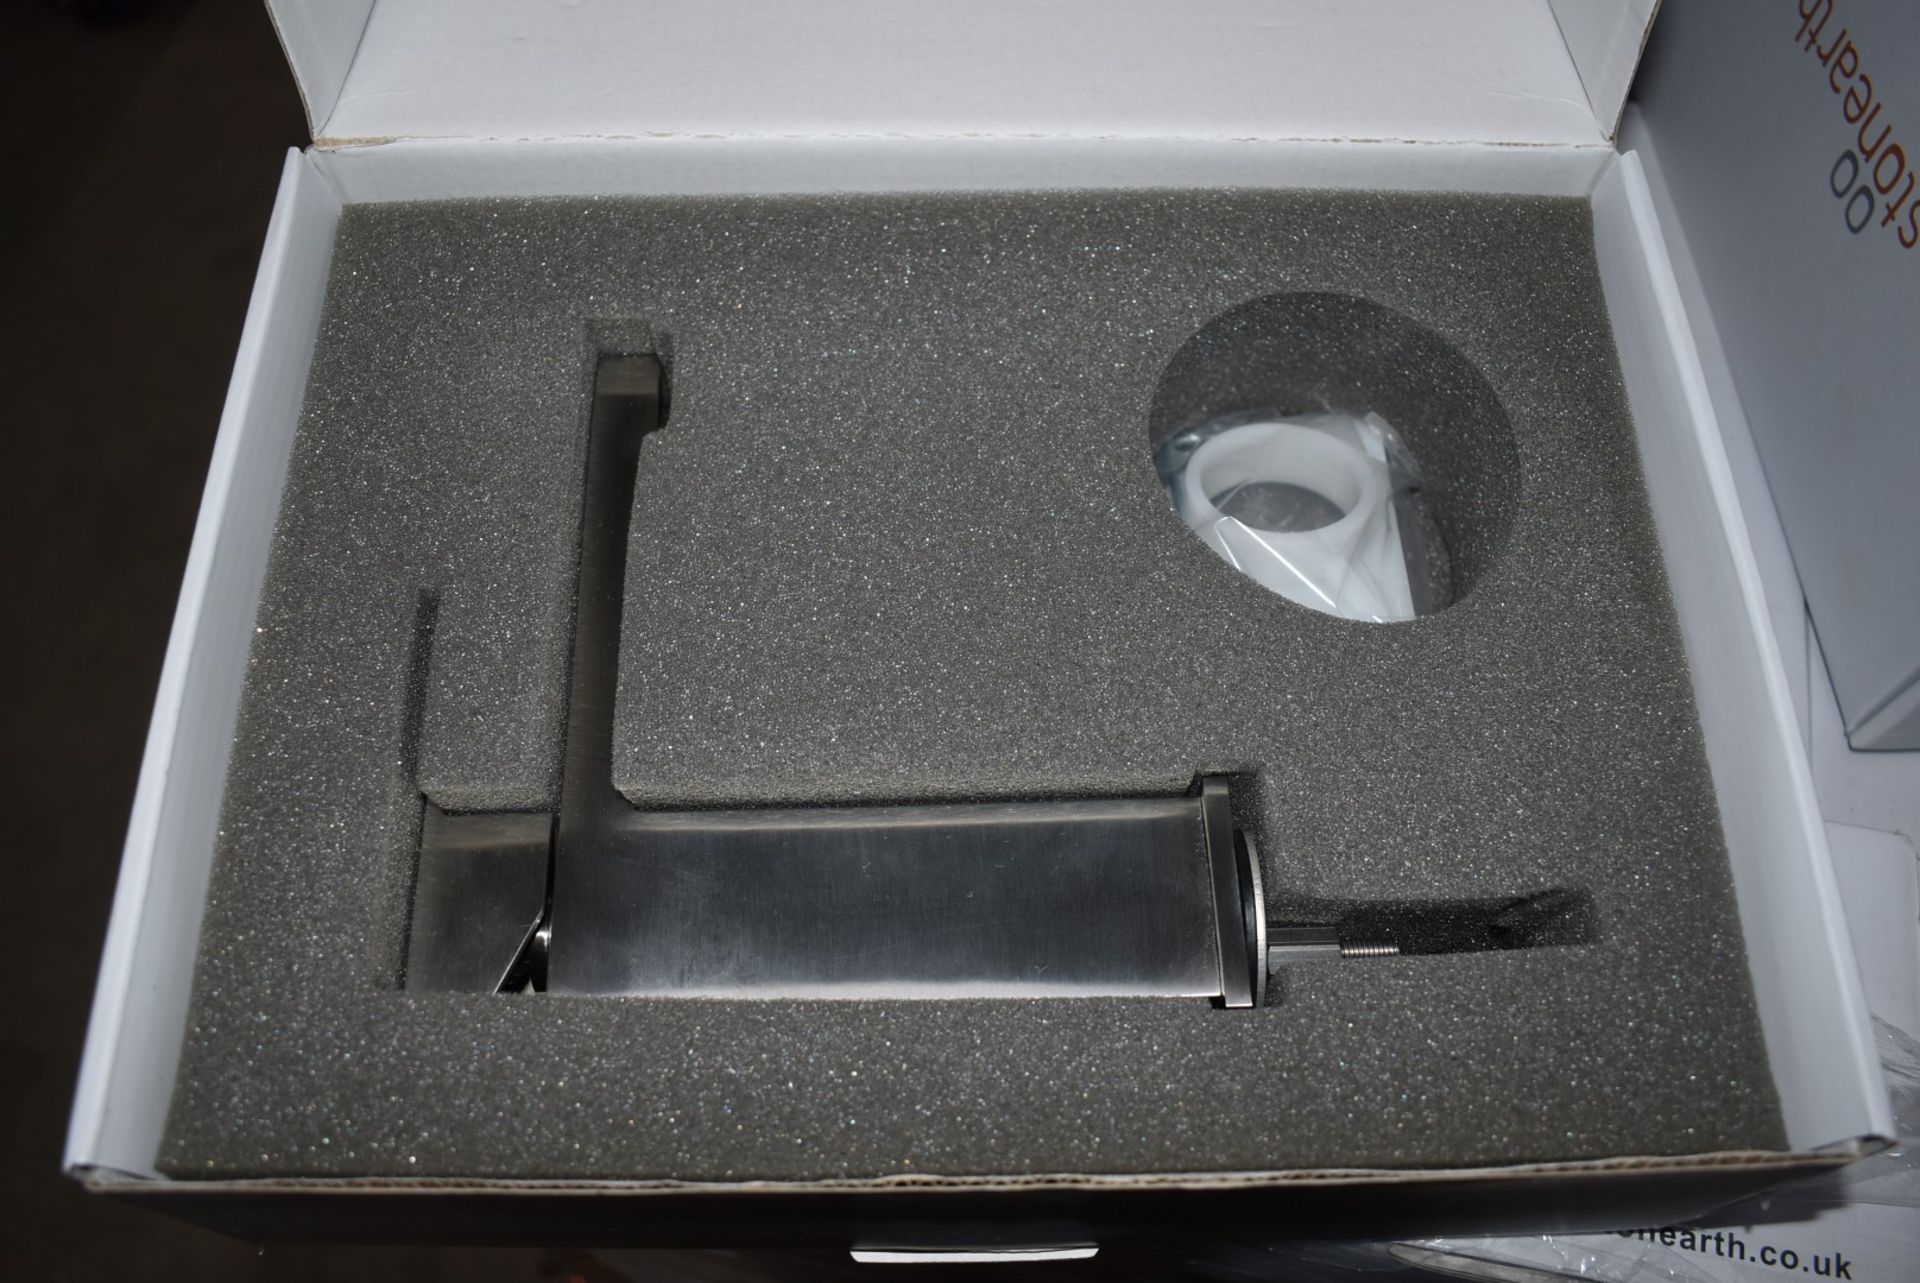 1 x Stonearth 'Metro' Stainless Steel Basin Mixer Tap - Brand New & Boxed - CL713 - RRP £245 - - Image 4 of 8